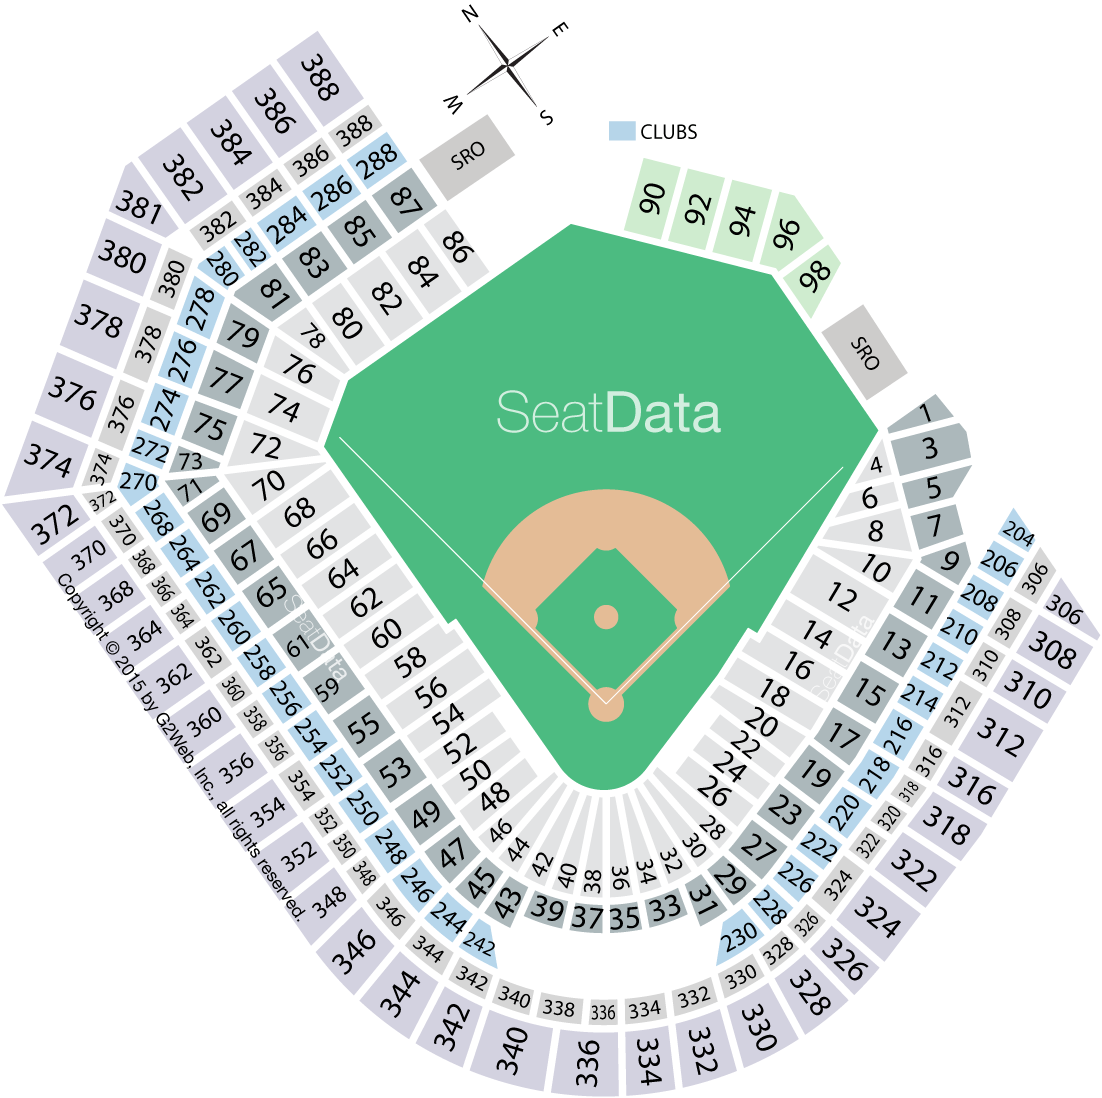 Baltimore Orioles Camden Yards Seating Chart